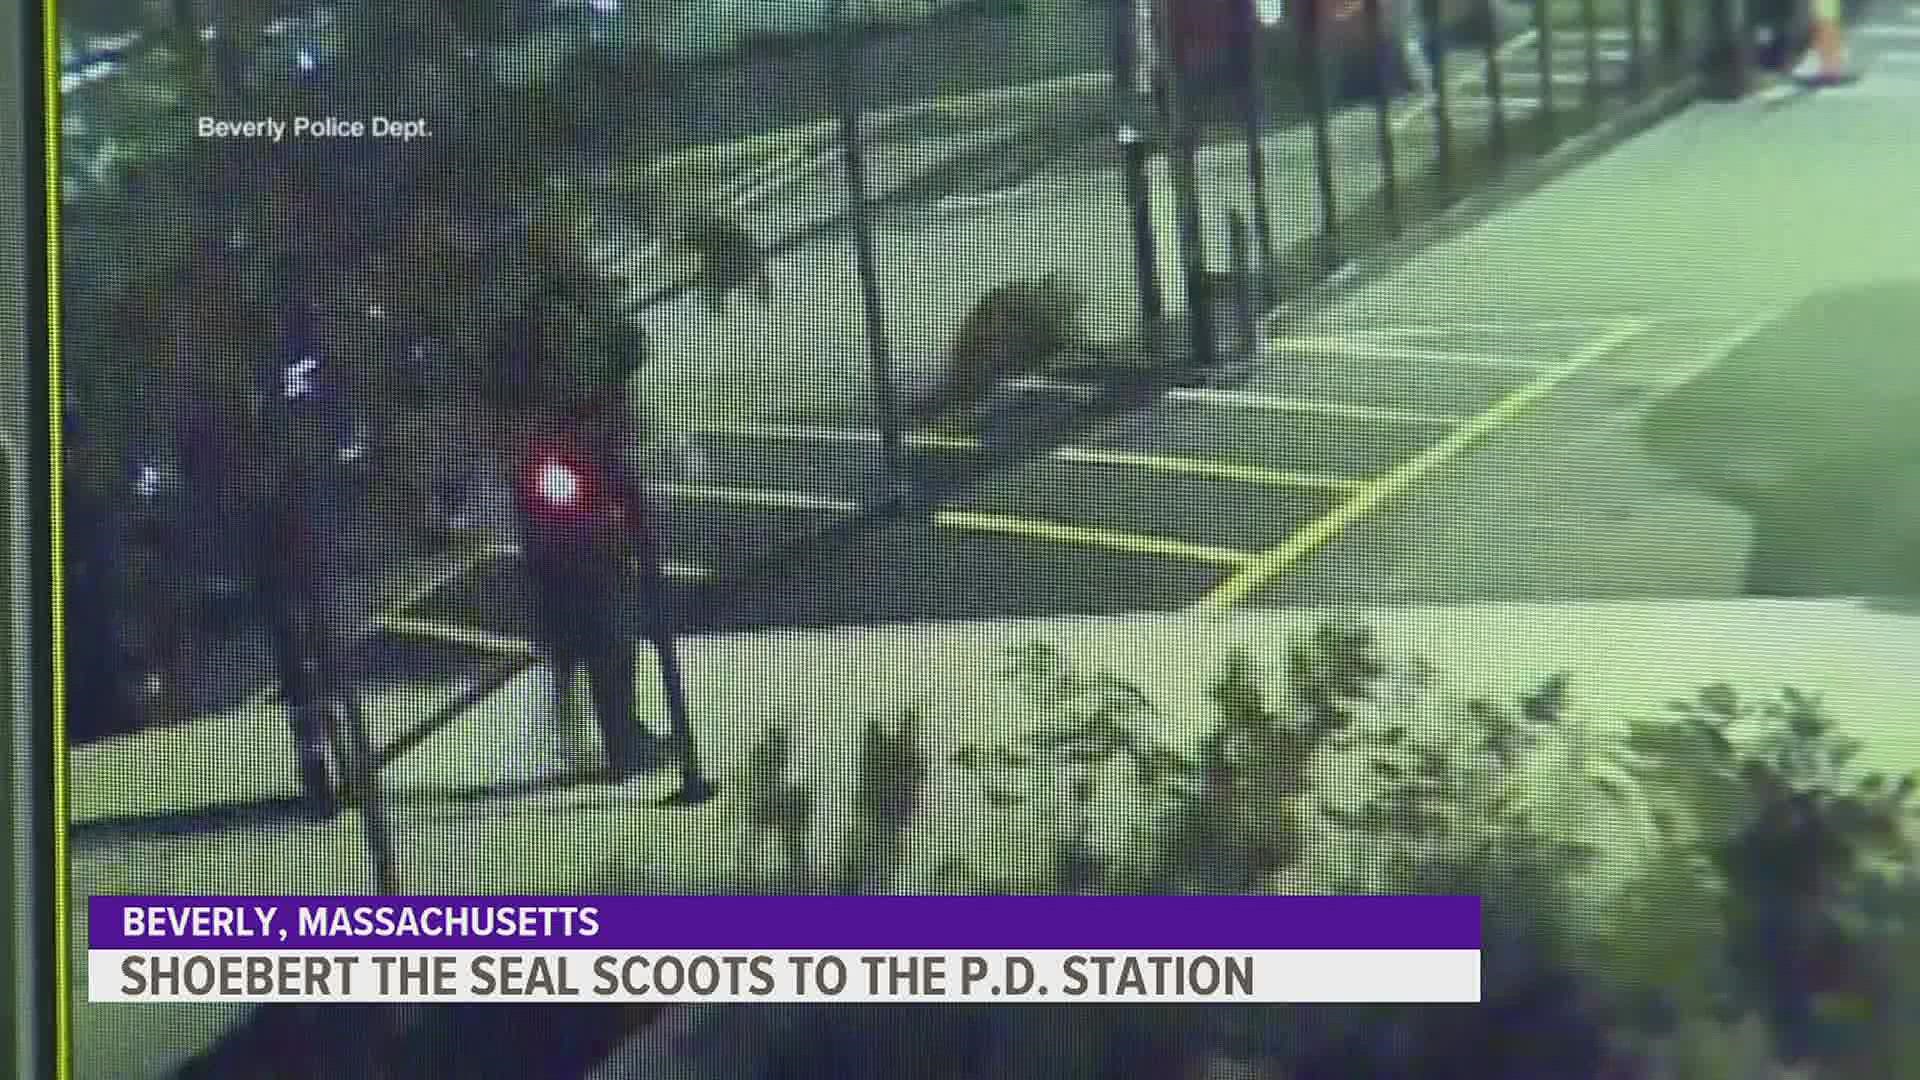 "Shoebert" made his way to a pond and evaded capture... but then crossed a parking lot and appeared outside the station a day later.